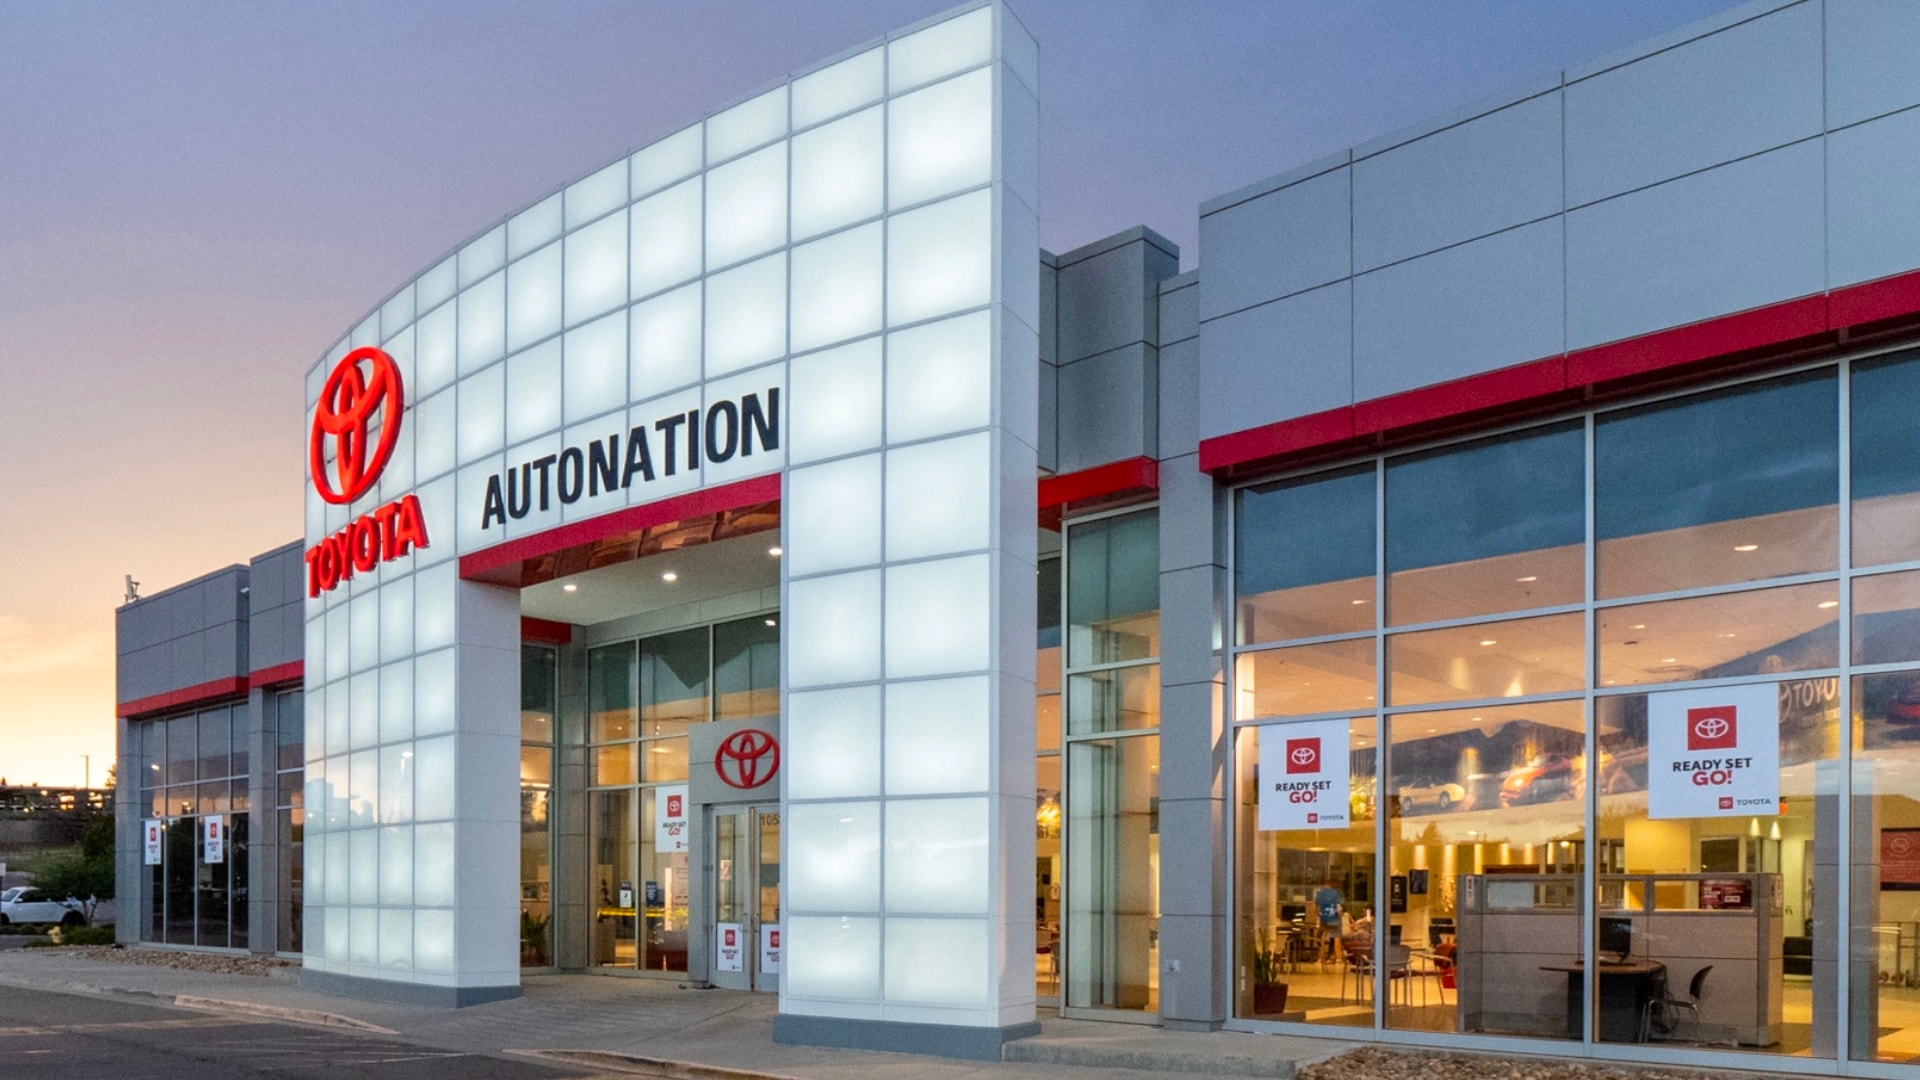 Exterior view of AutoNation Toyota Arapahoe, with either a sunset or a sunrise, as the sky in the background has some yellow and red. The building has a glass facade, and there are red and white posters on some of them.